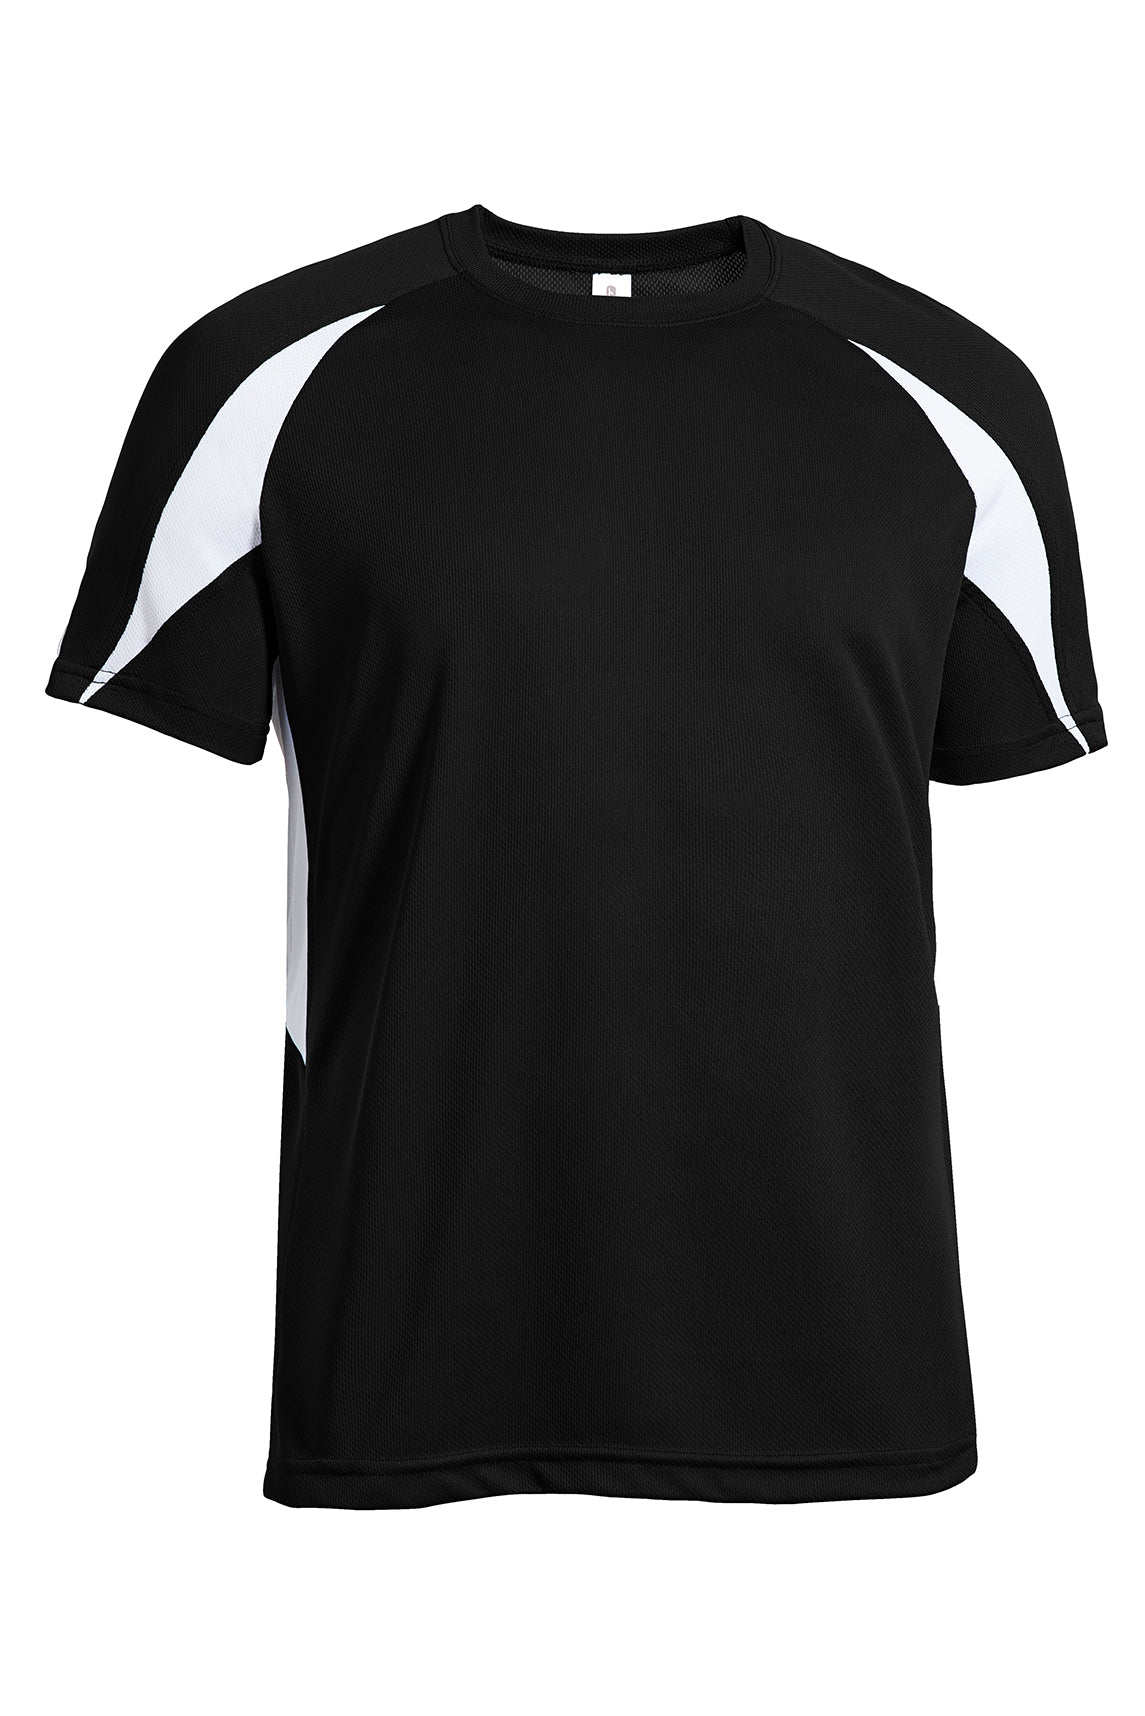 Expert Apparel Men's Oxymesh™ Crossroad Colorblock Tee in Black White#color_black-white